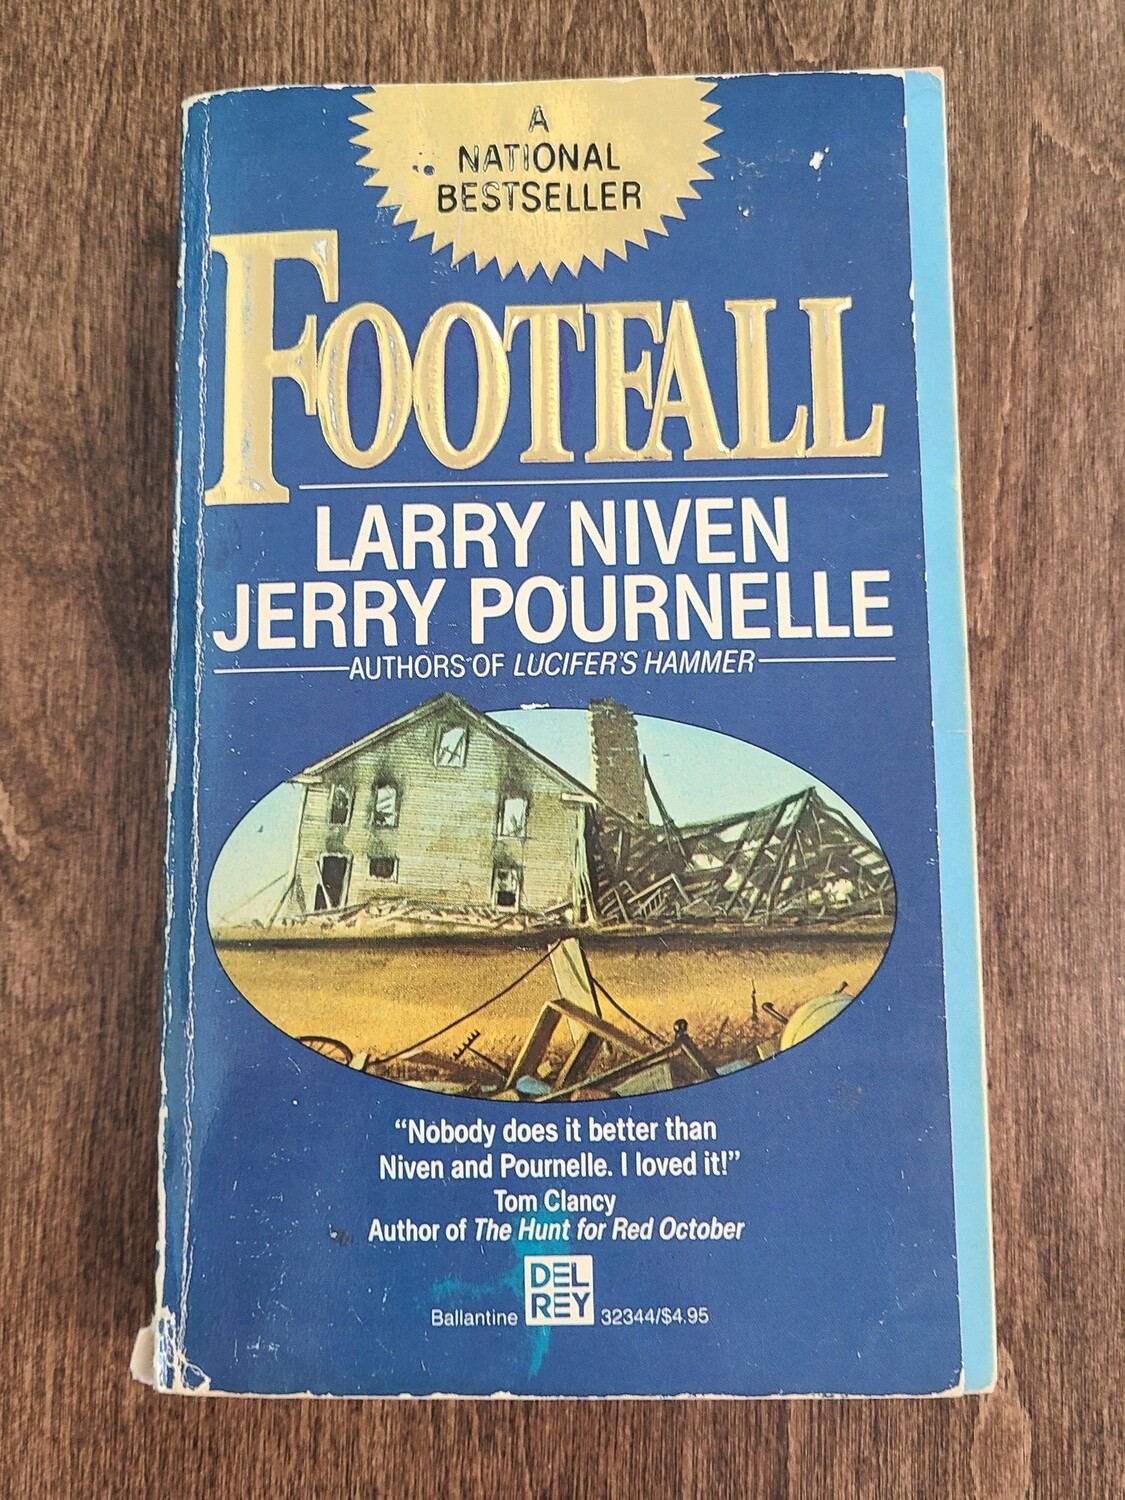 Footfall by Larry Niven & Jerry Pournelle